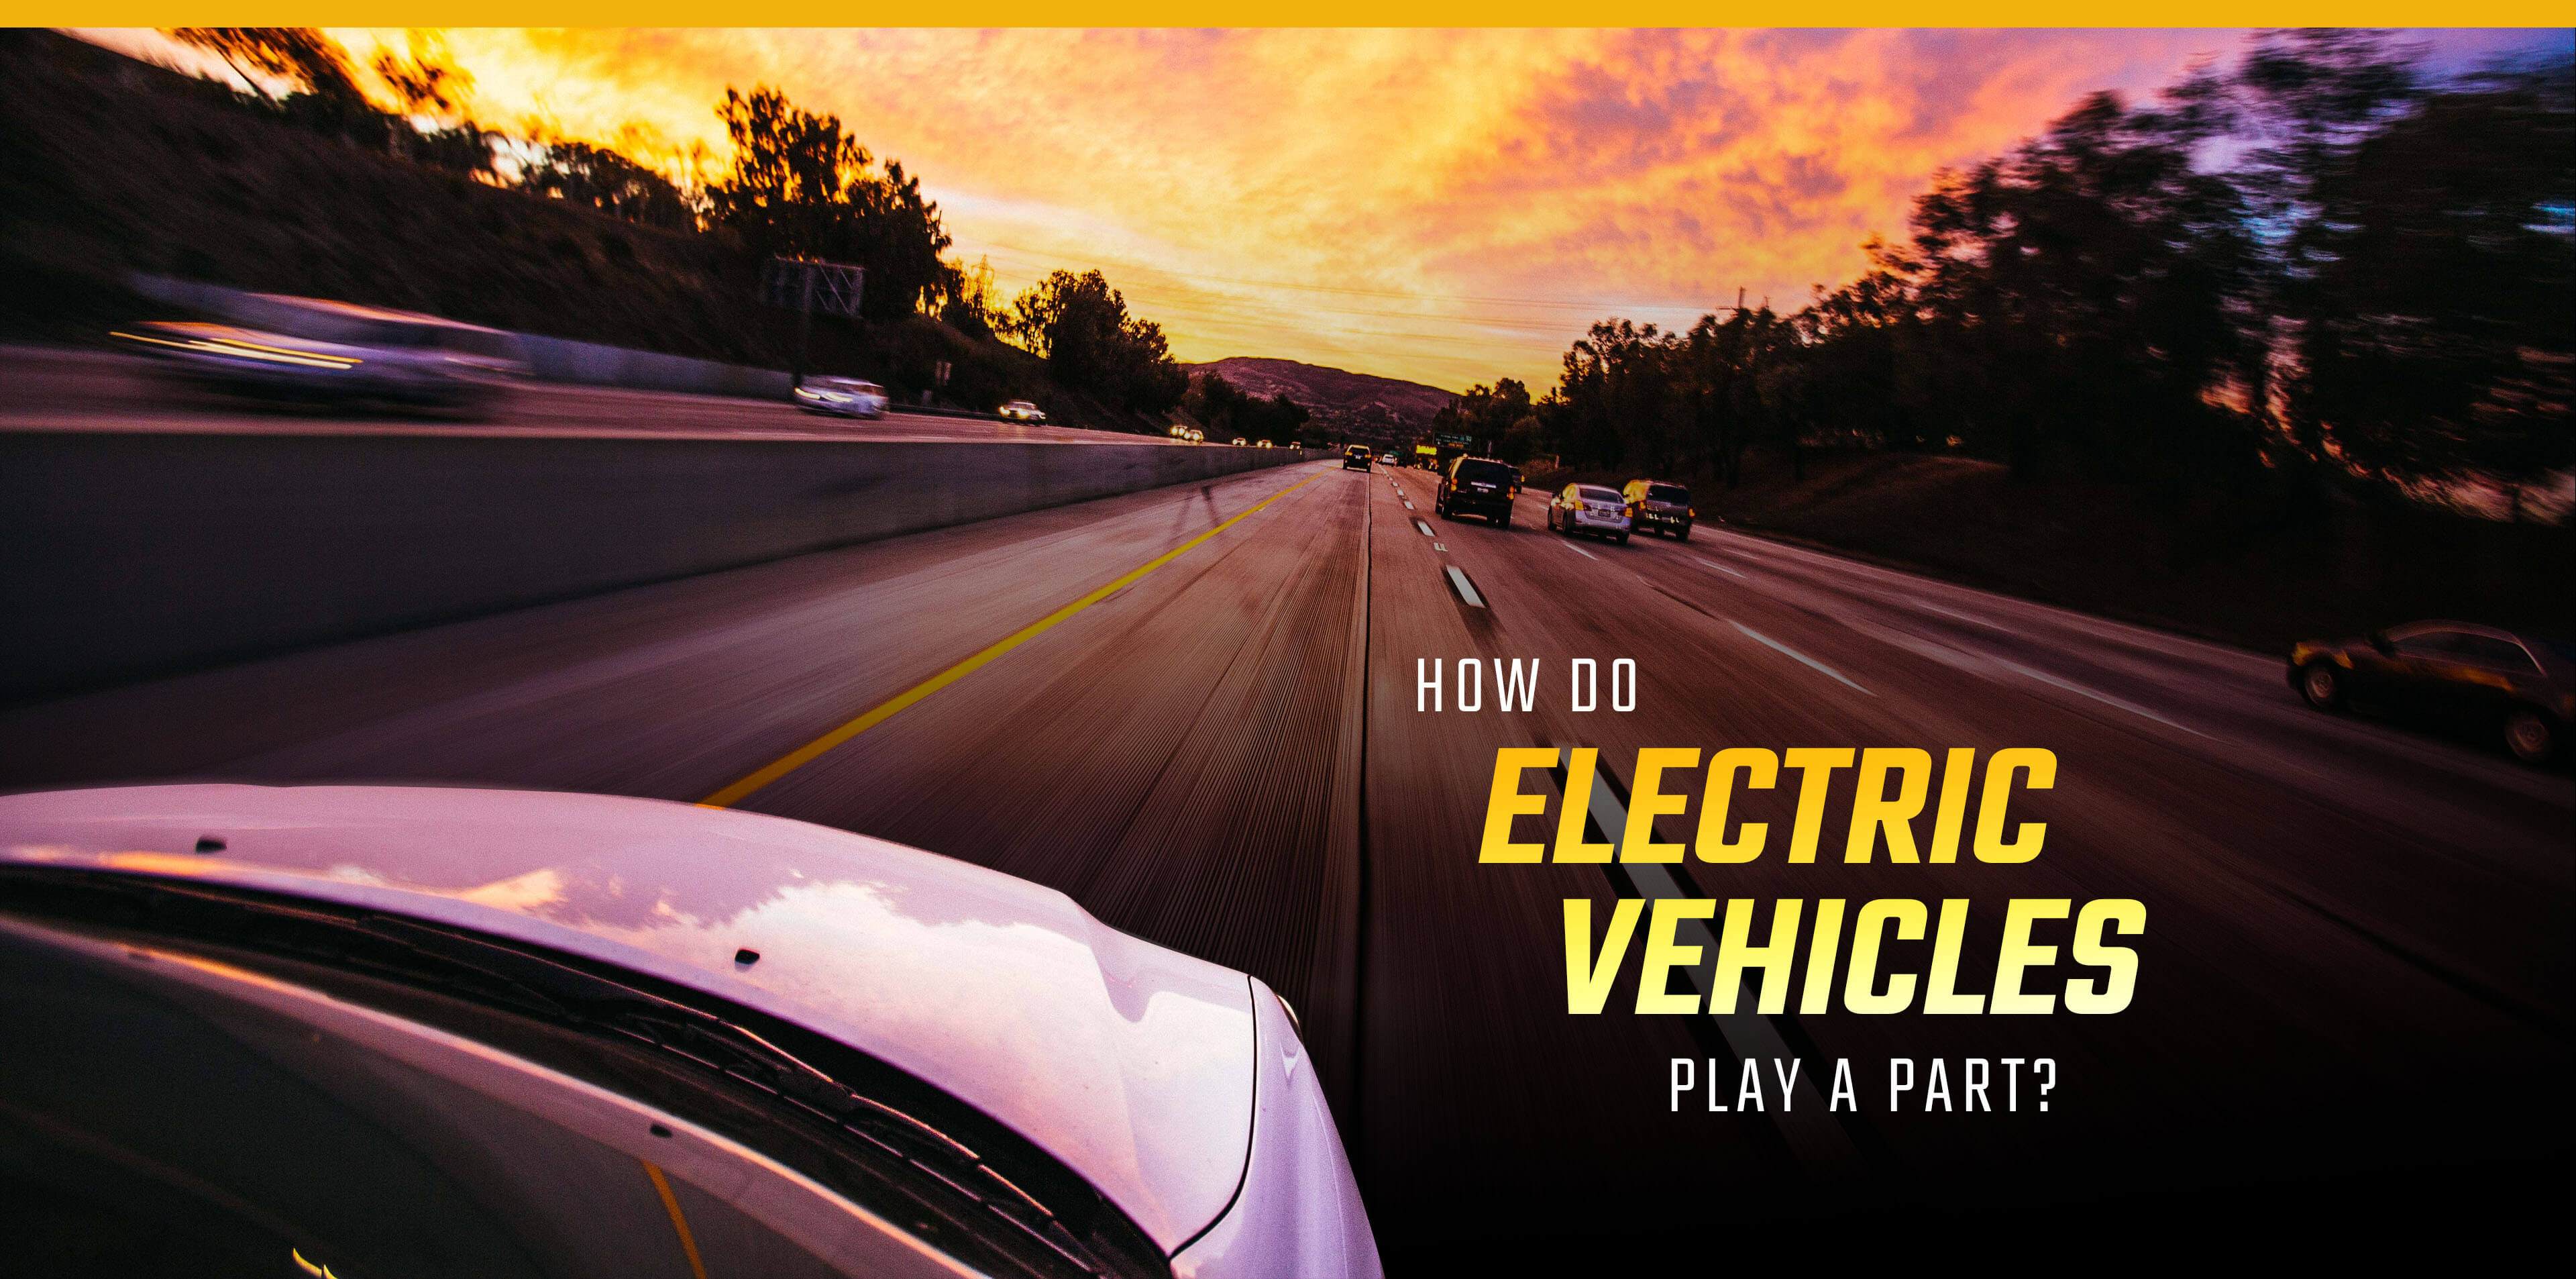 How do Electric Vehichles Play a Part?